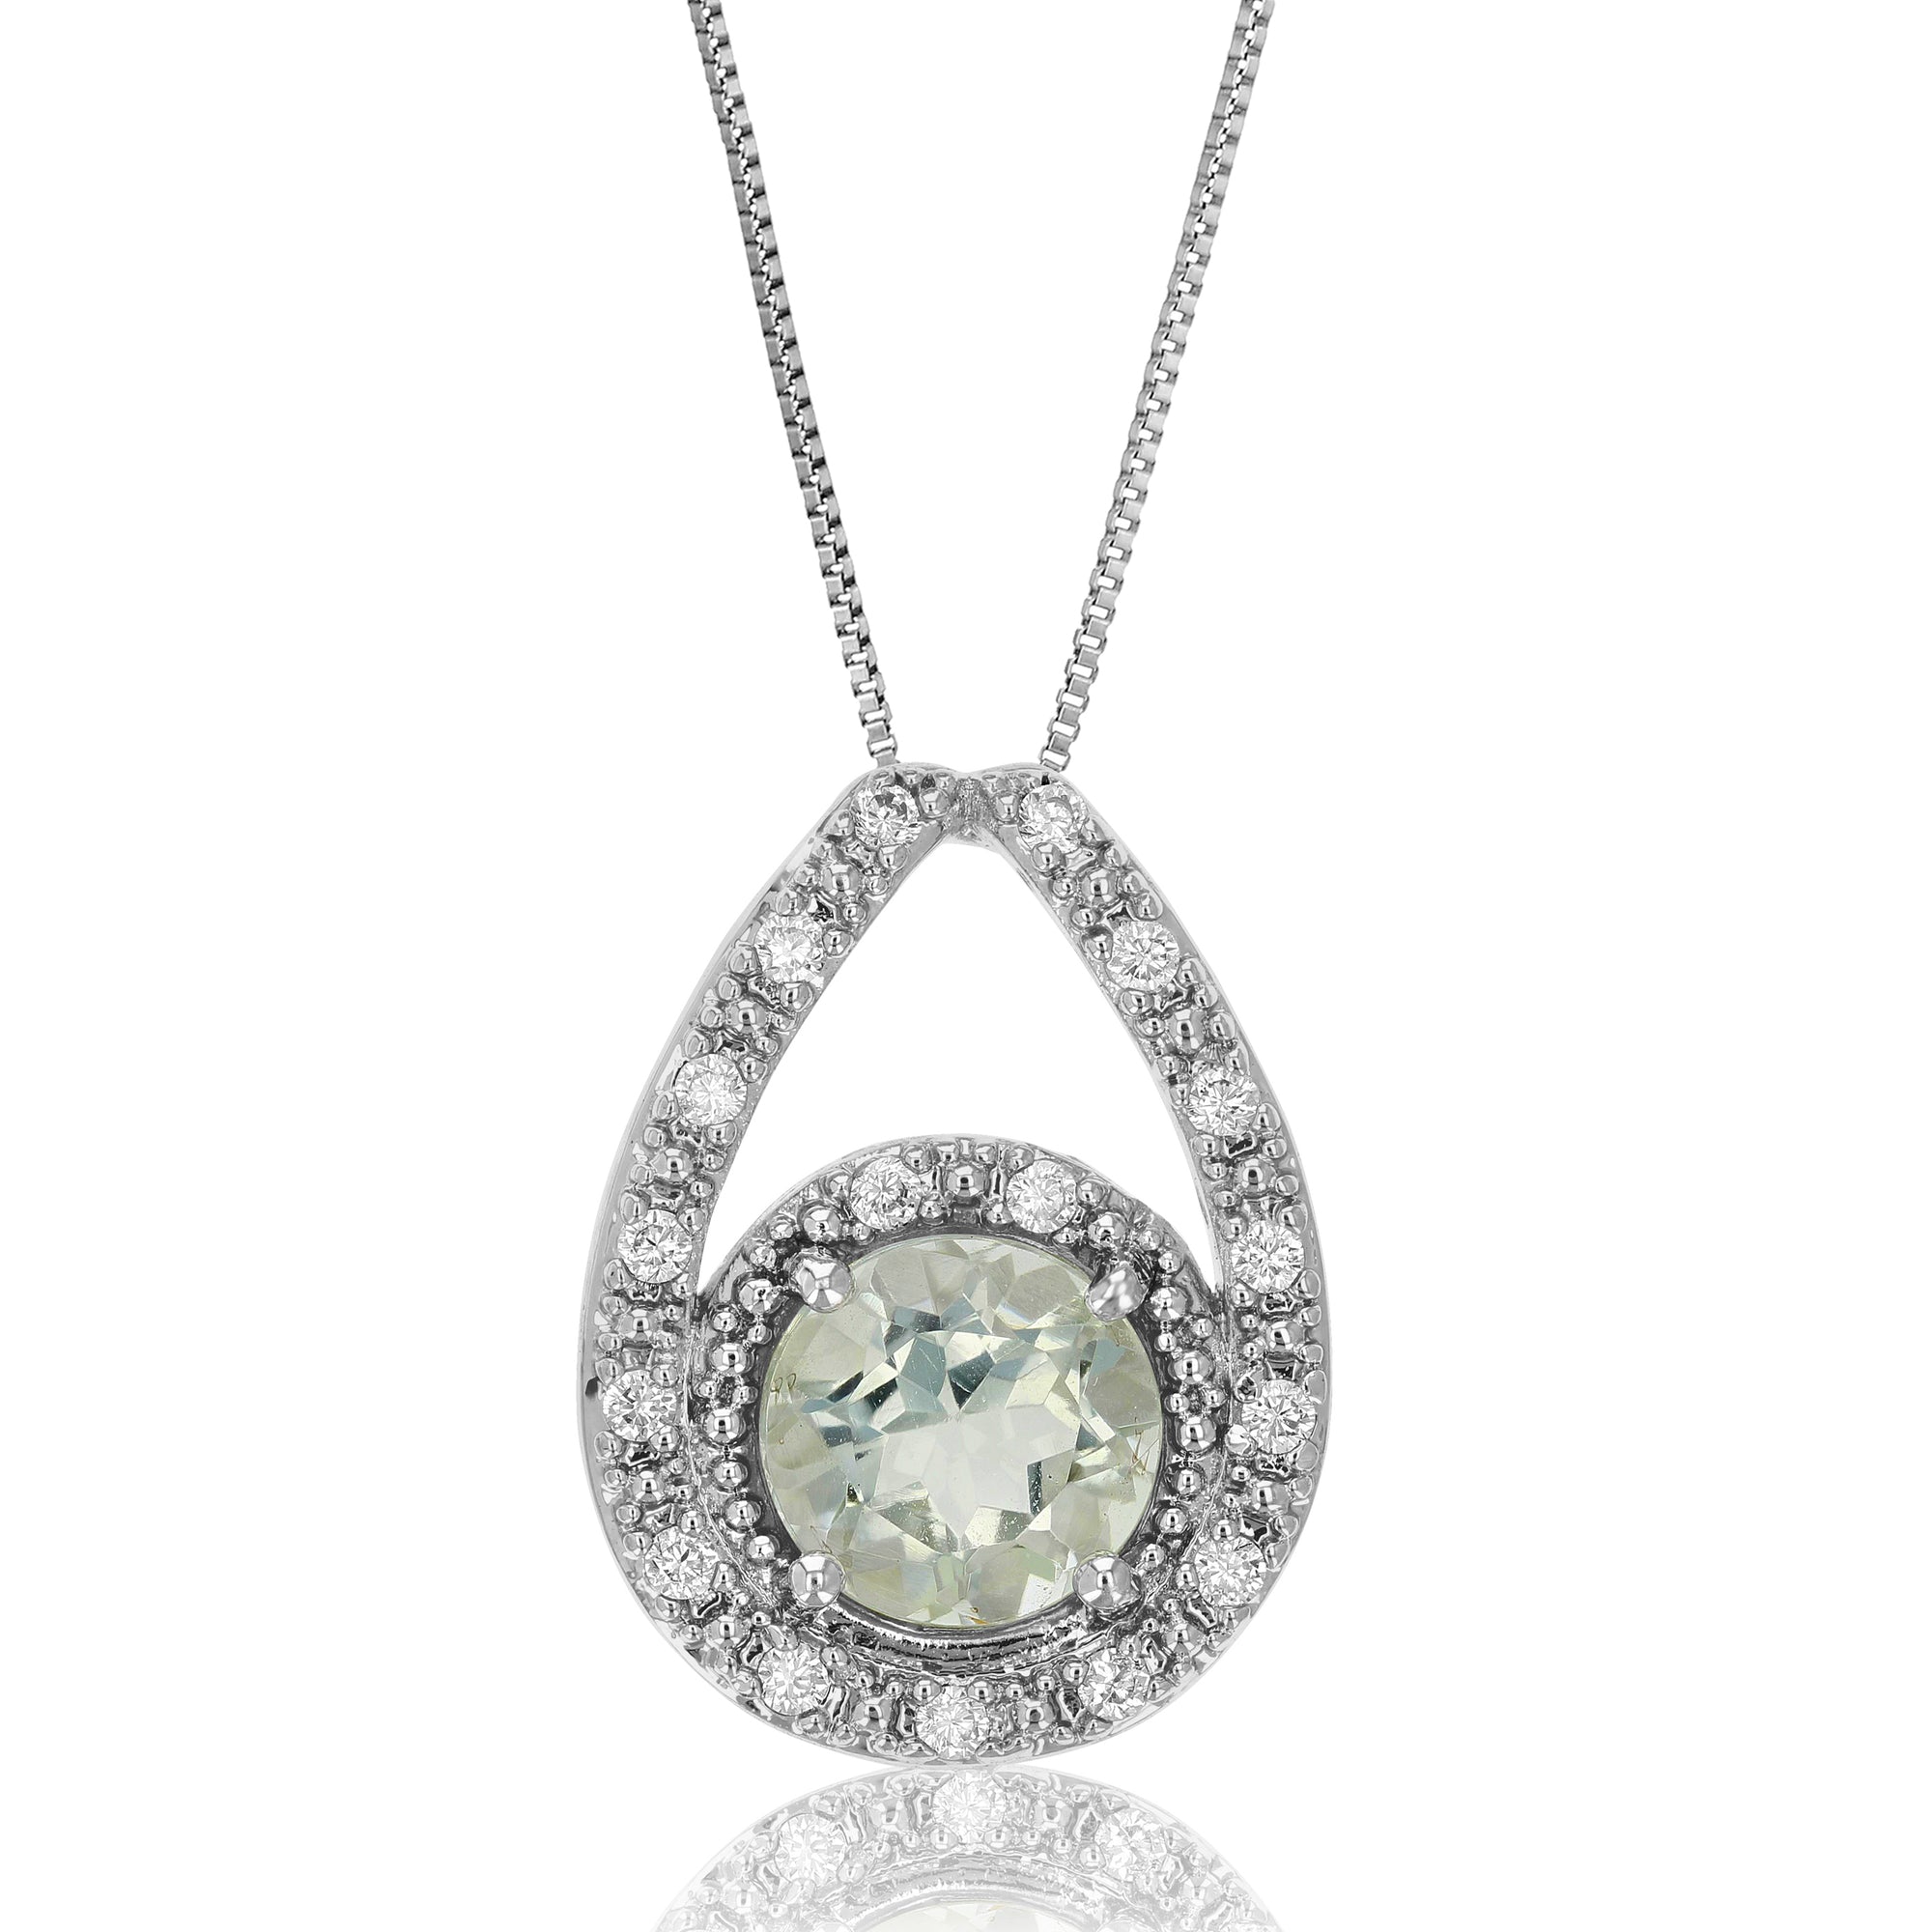 0.80 cttw Pendant Necklace, Green Amethyst Pendant Necklace for Women in Brass with Rhodium Plating, 18 Inch Chain, Prong Setting